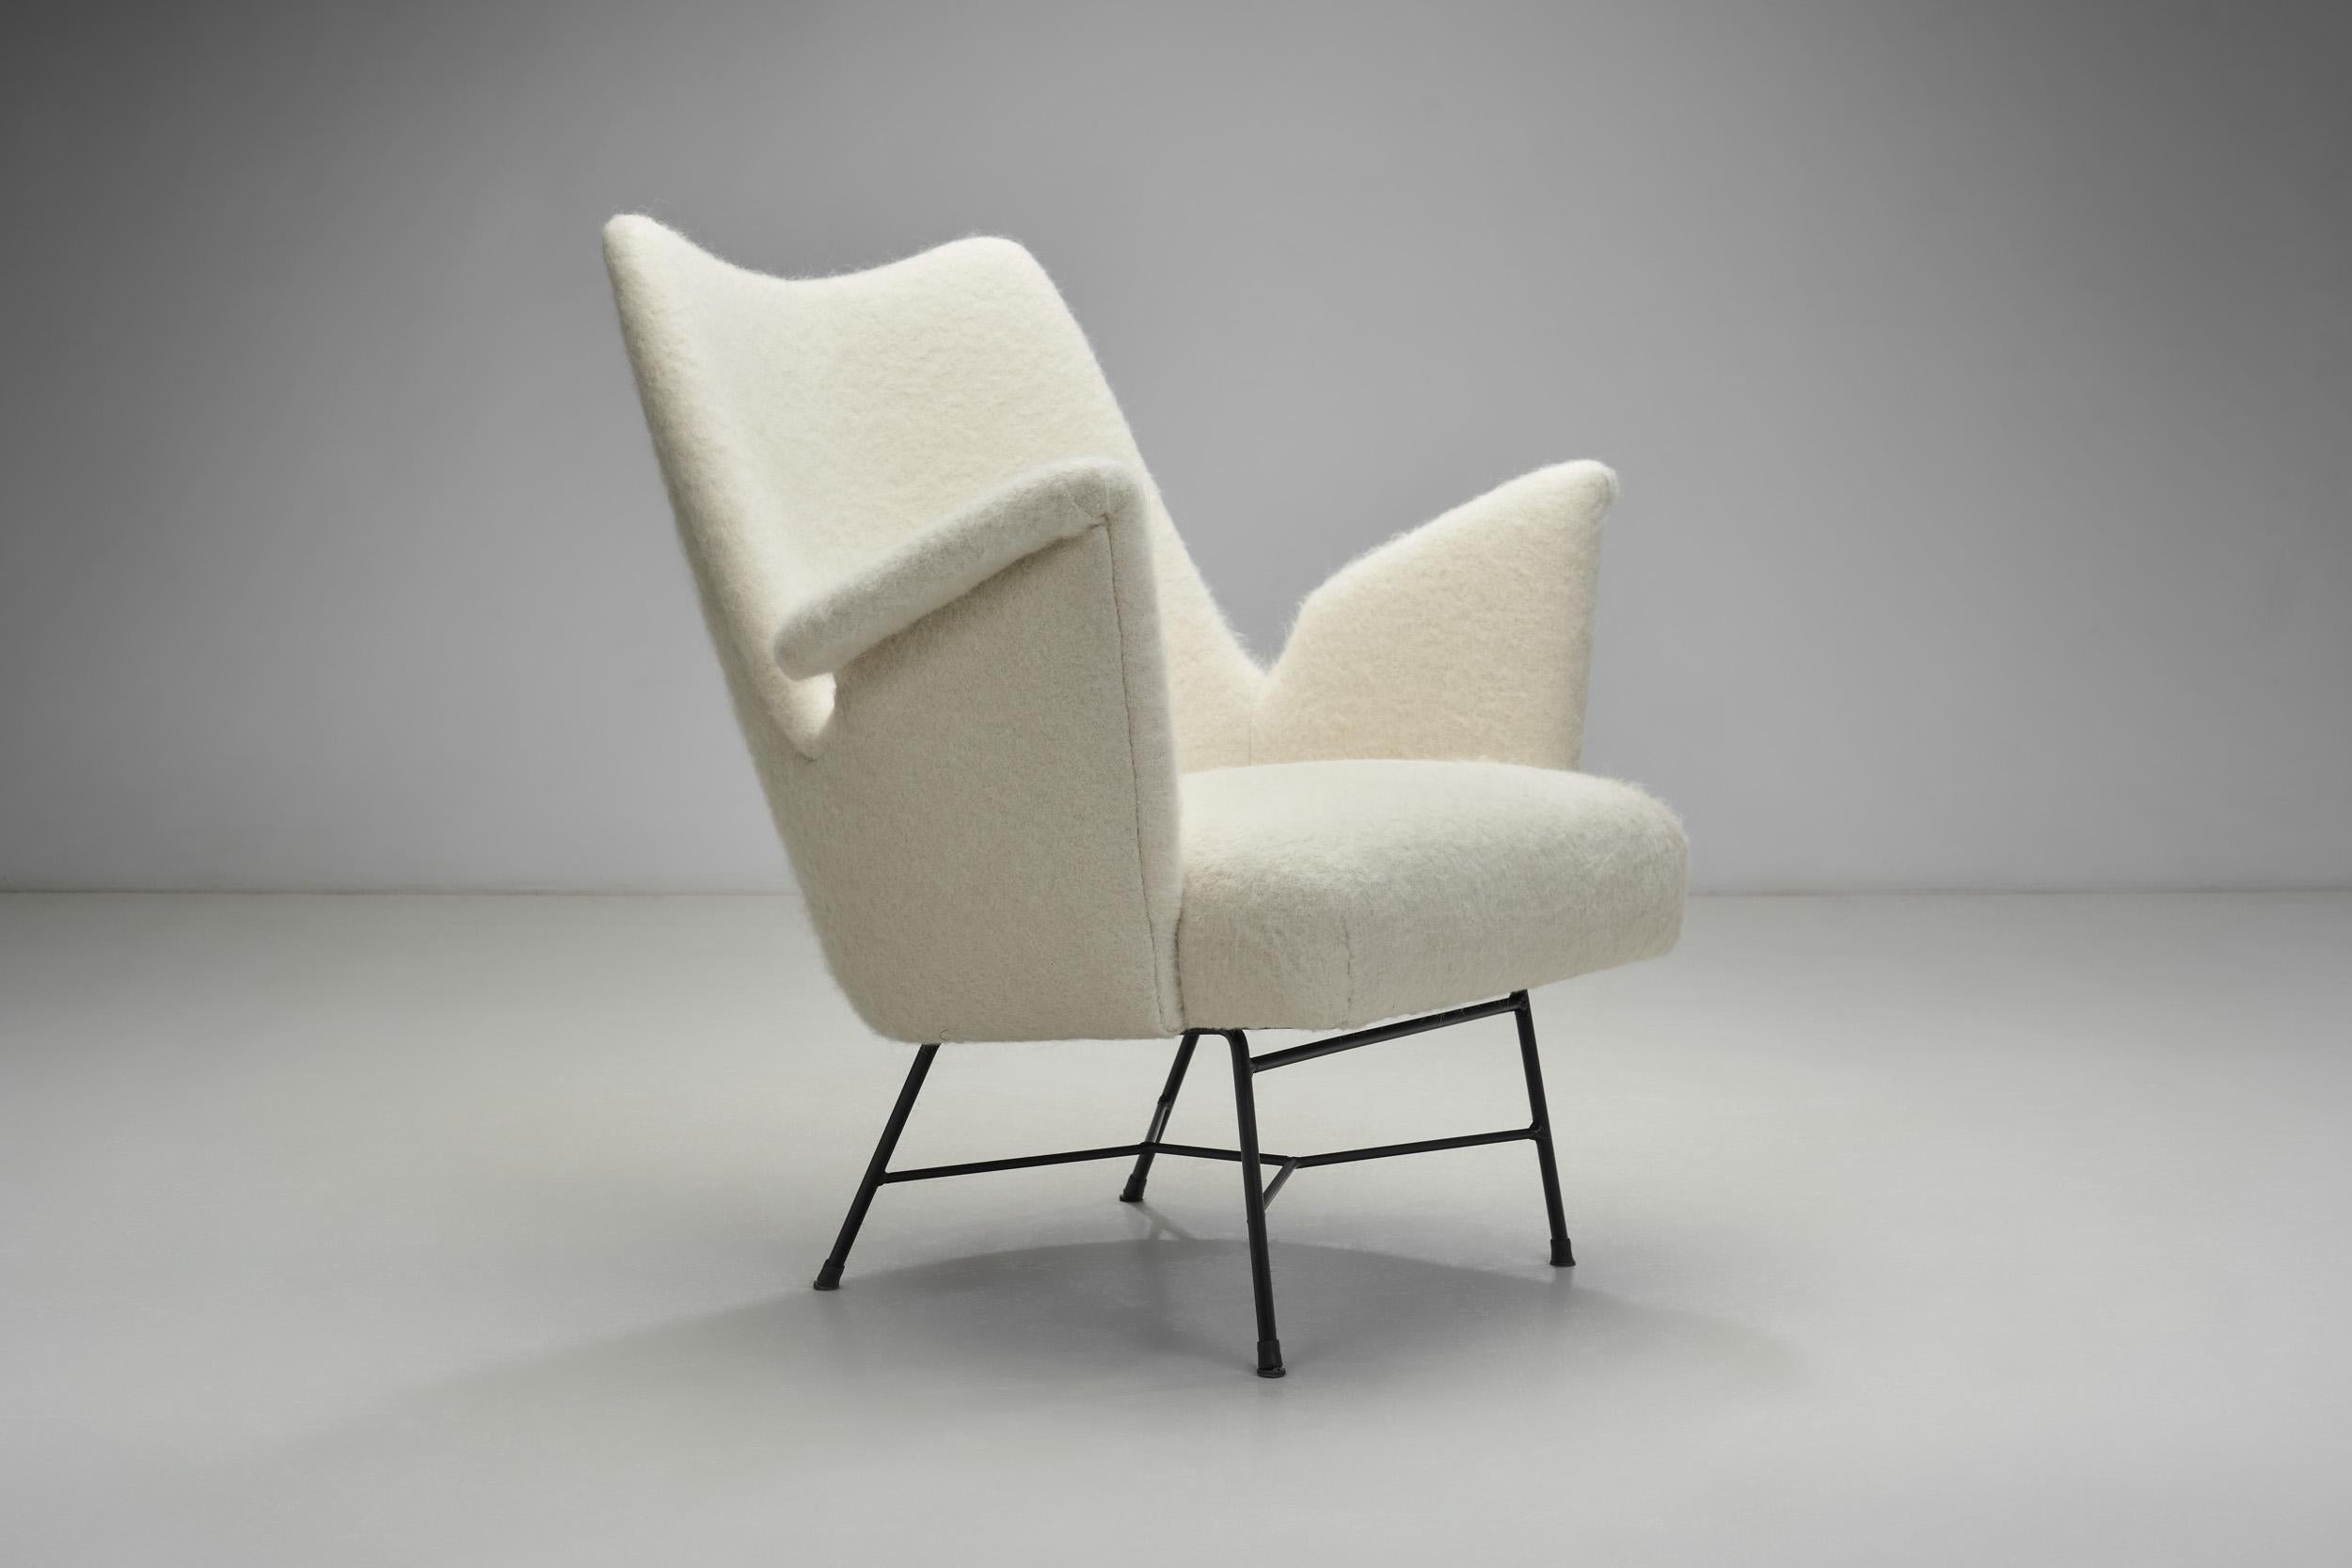 Mid-20th Century Upholstered Lounge Chair with Metal Legs, Europe 1950s For Sale